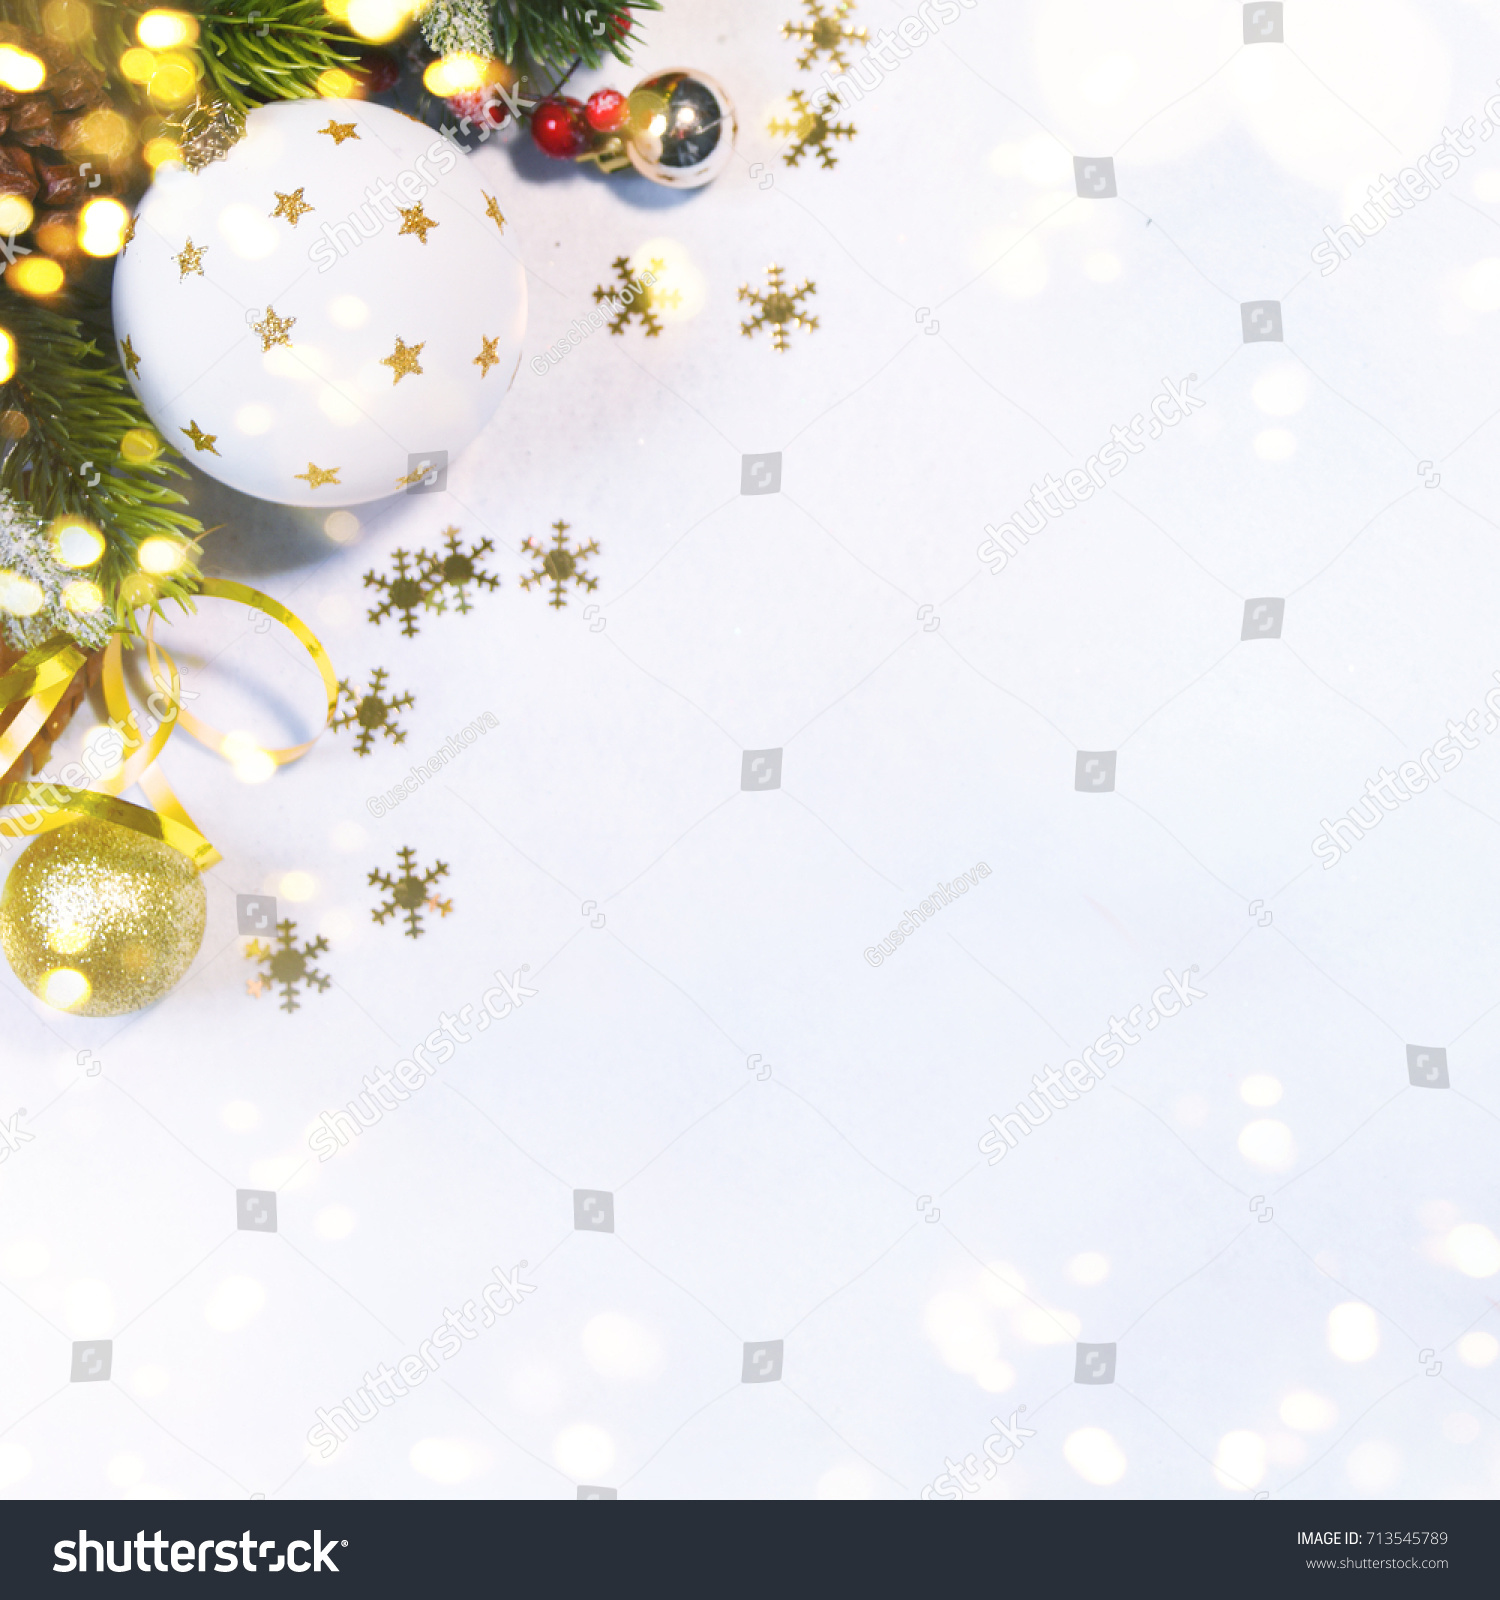 Holiday background, greeting card for Christmas and New Year #713545789